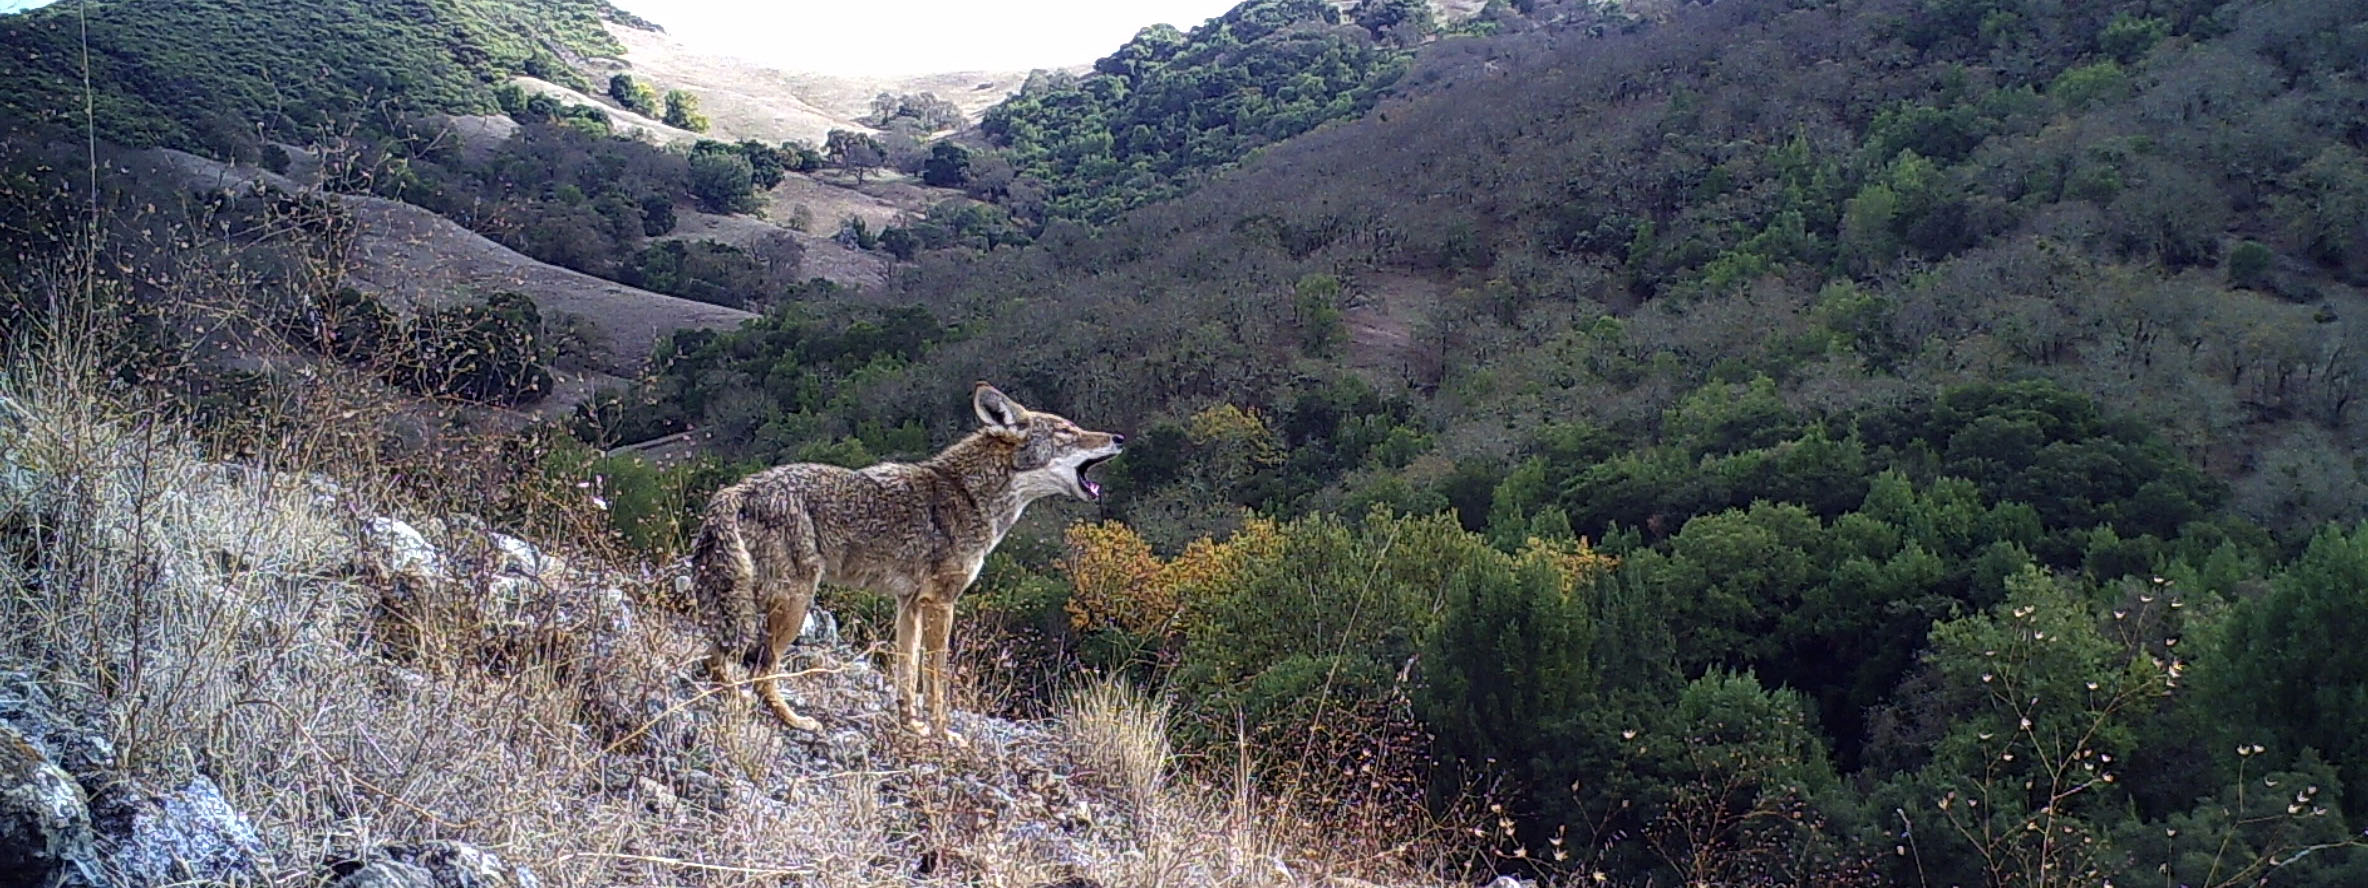 Coyote howling on grassy hillside with rocks and oak woodland in background